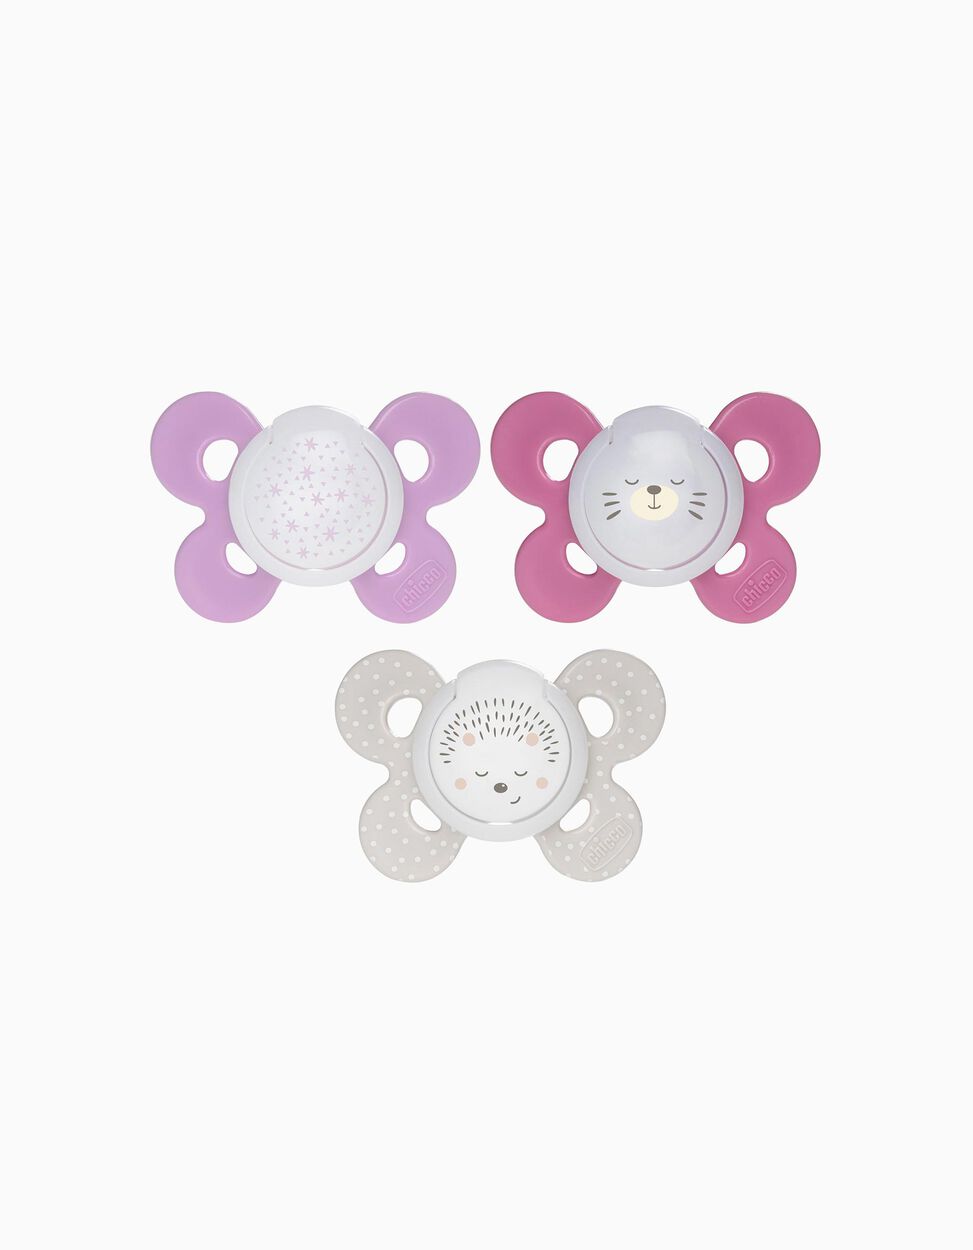 2 Night Glowing Confort Silicone Dummy 16-36M+, Chicco